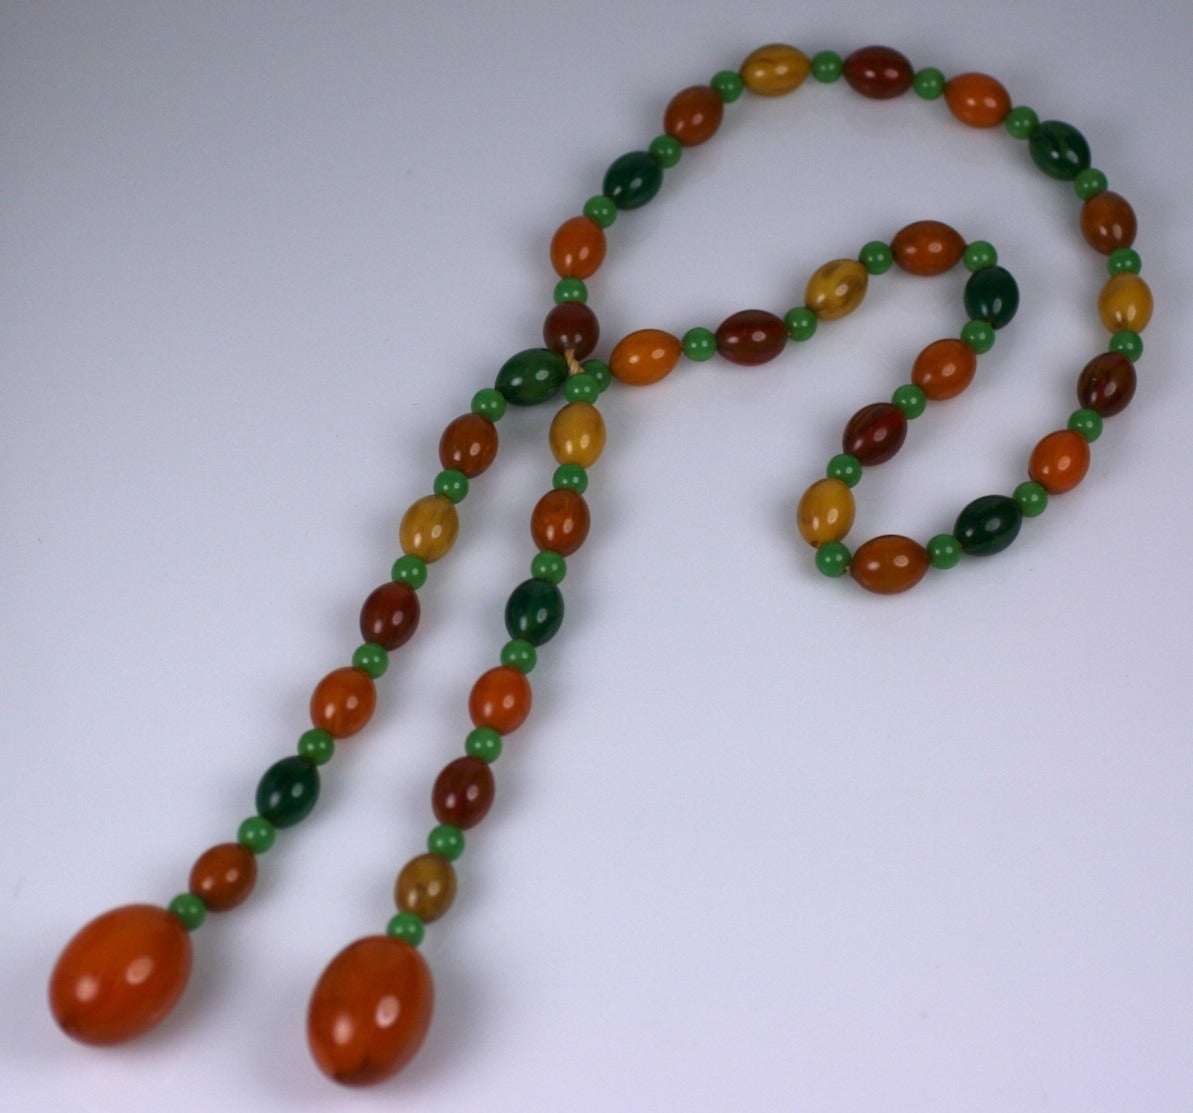 Art Deco Bakelite lariat in tones of green, caramel and amber. Can be worn as a belt as well. Great summer colors made to look like organics. 44